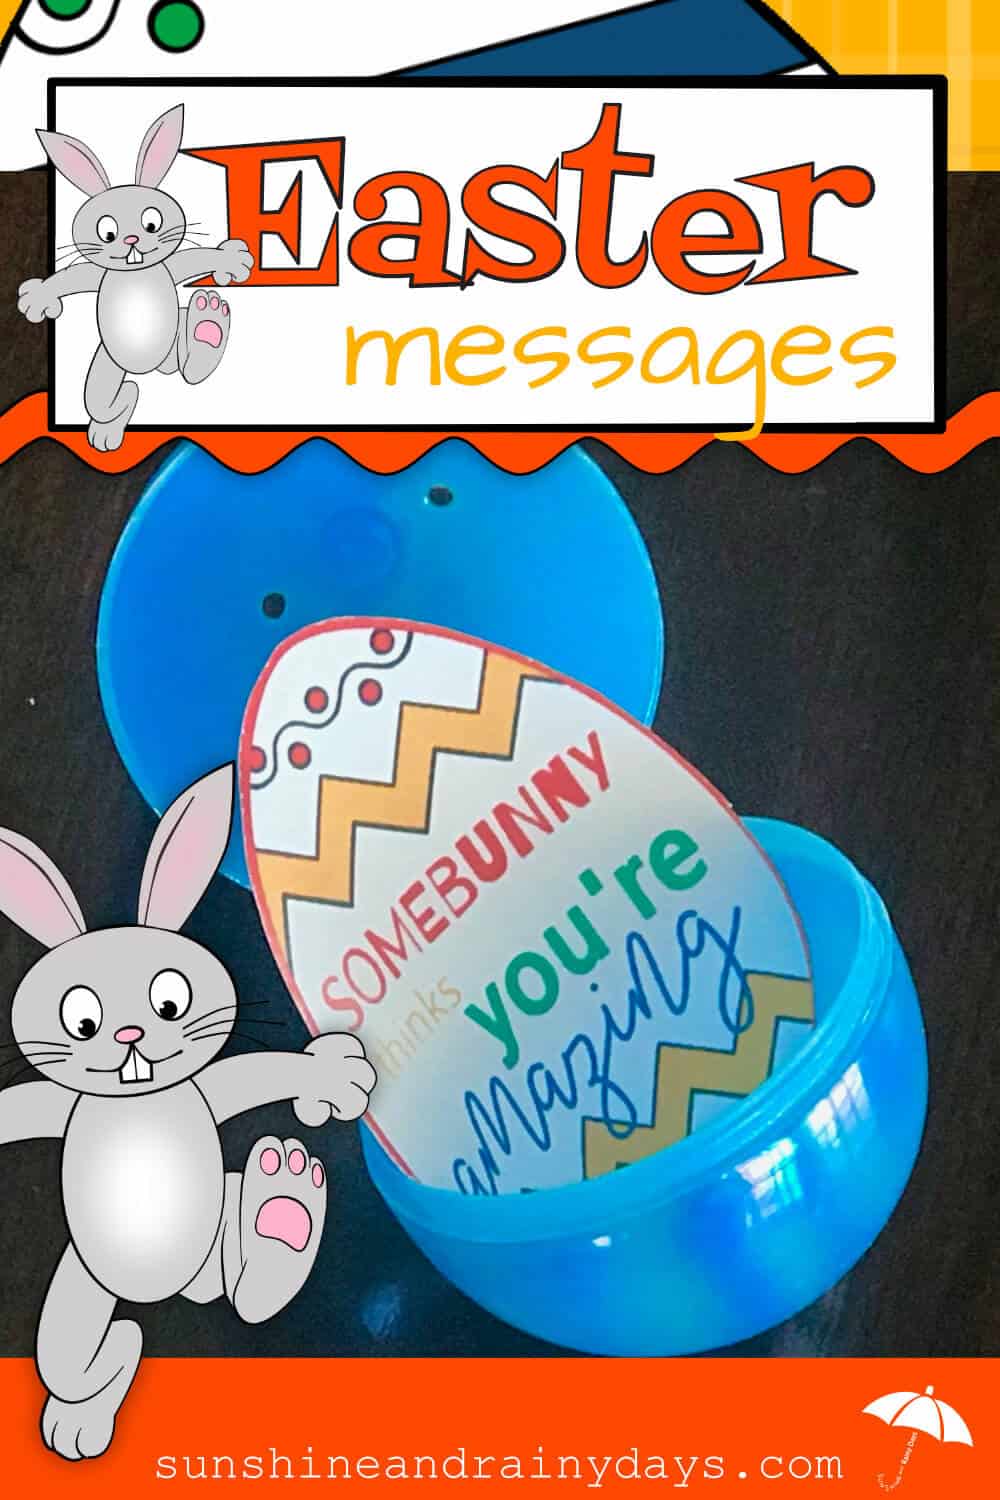 Make your Easter egg-stra special with punny and inspirational Easter Messages designed to fit in plastic Easter Eggs! Don't forget to add candy! Easter Egg Hunt | Easter Printable | Easter Eggs | #easteregghunt #eastereggs #SARD